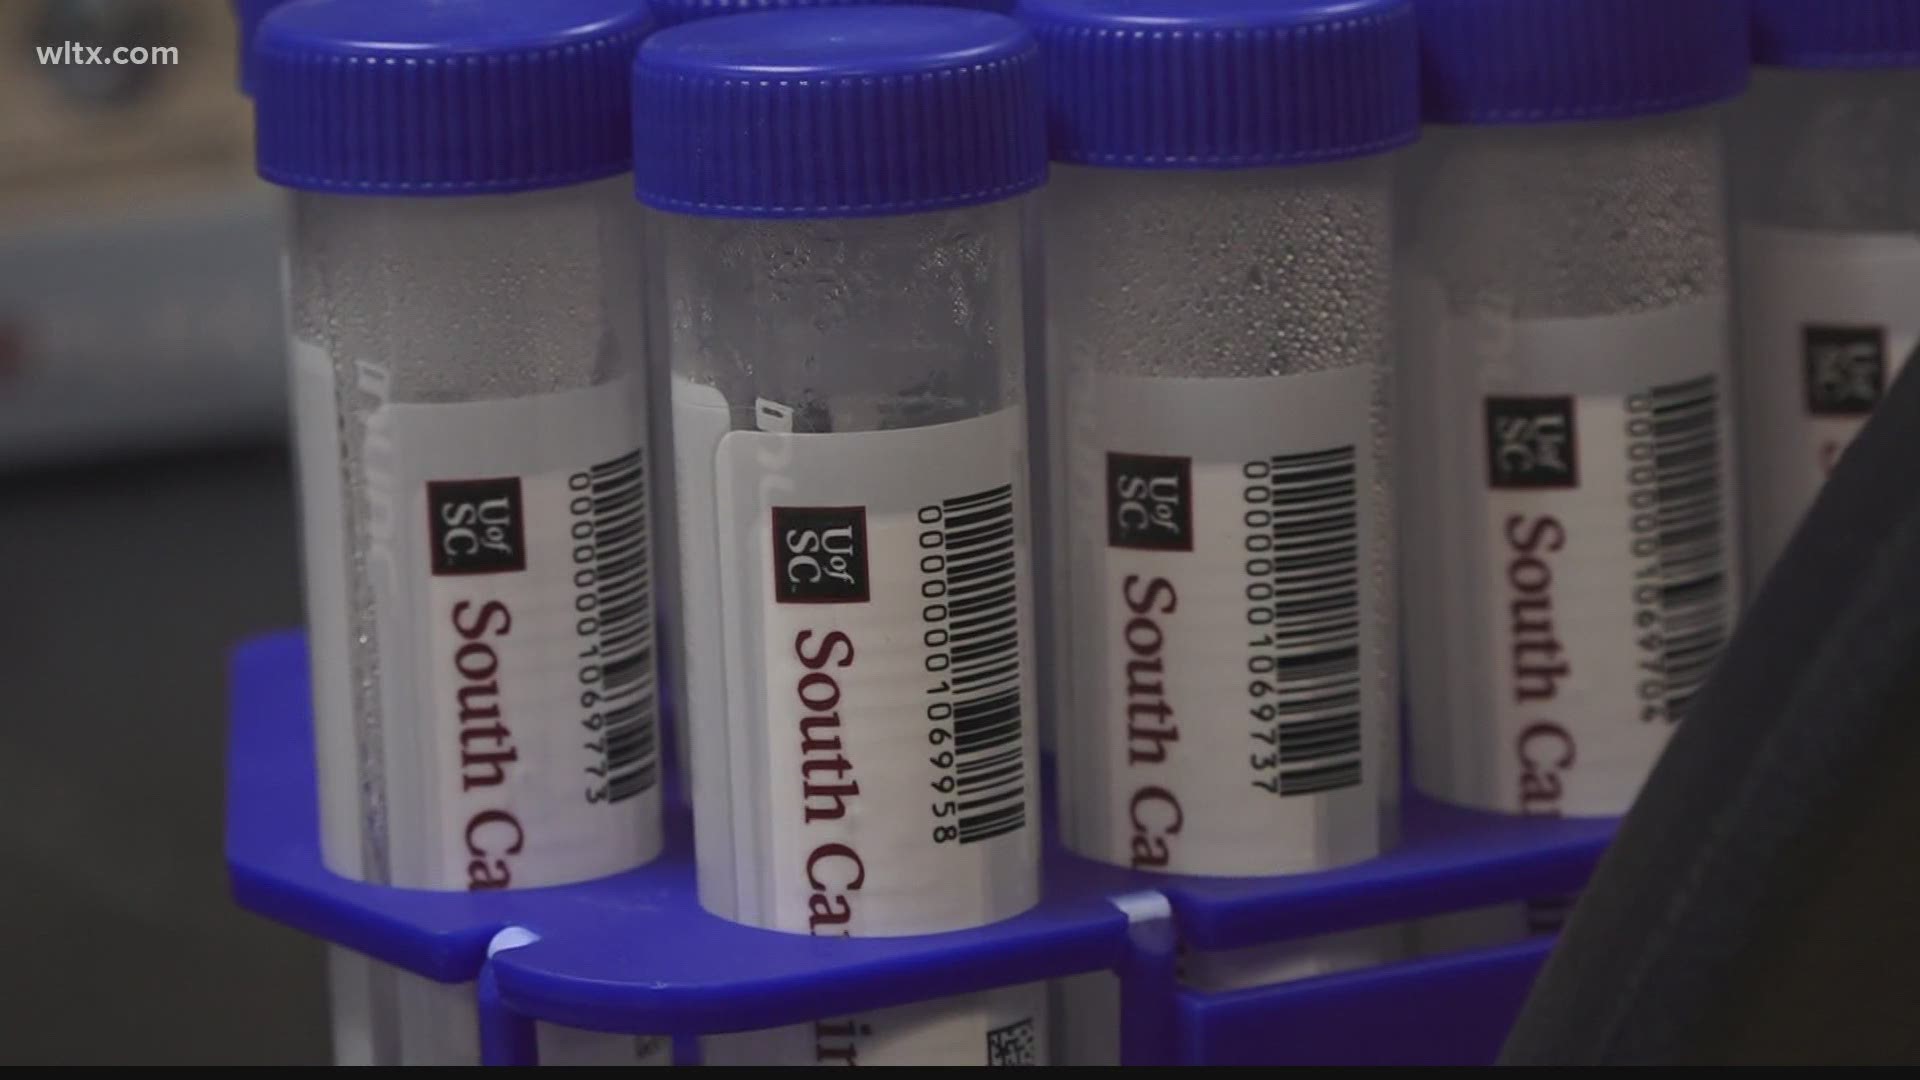 Officials with the S.C. Department of Health and Environmental Control (DHEC) say they hope to make use of saliva tests developed at USC.